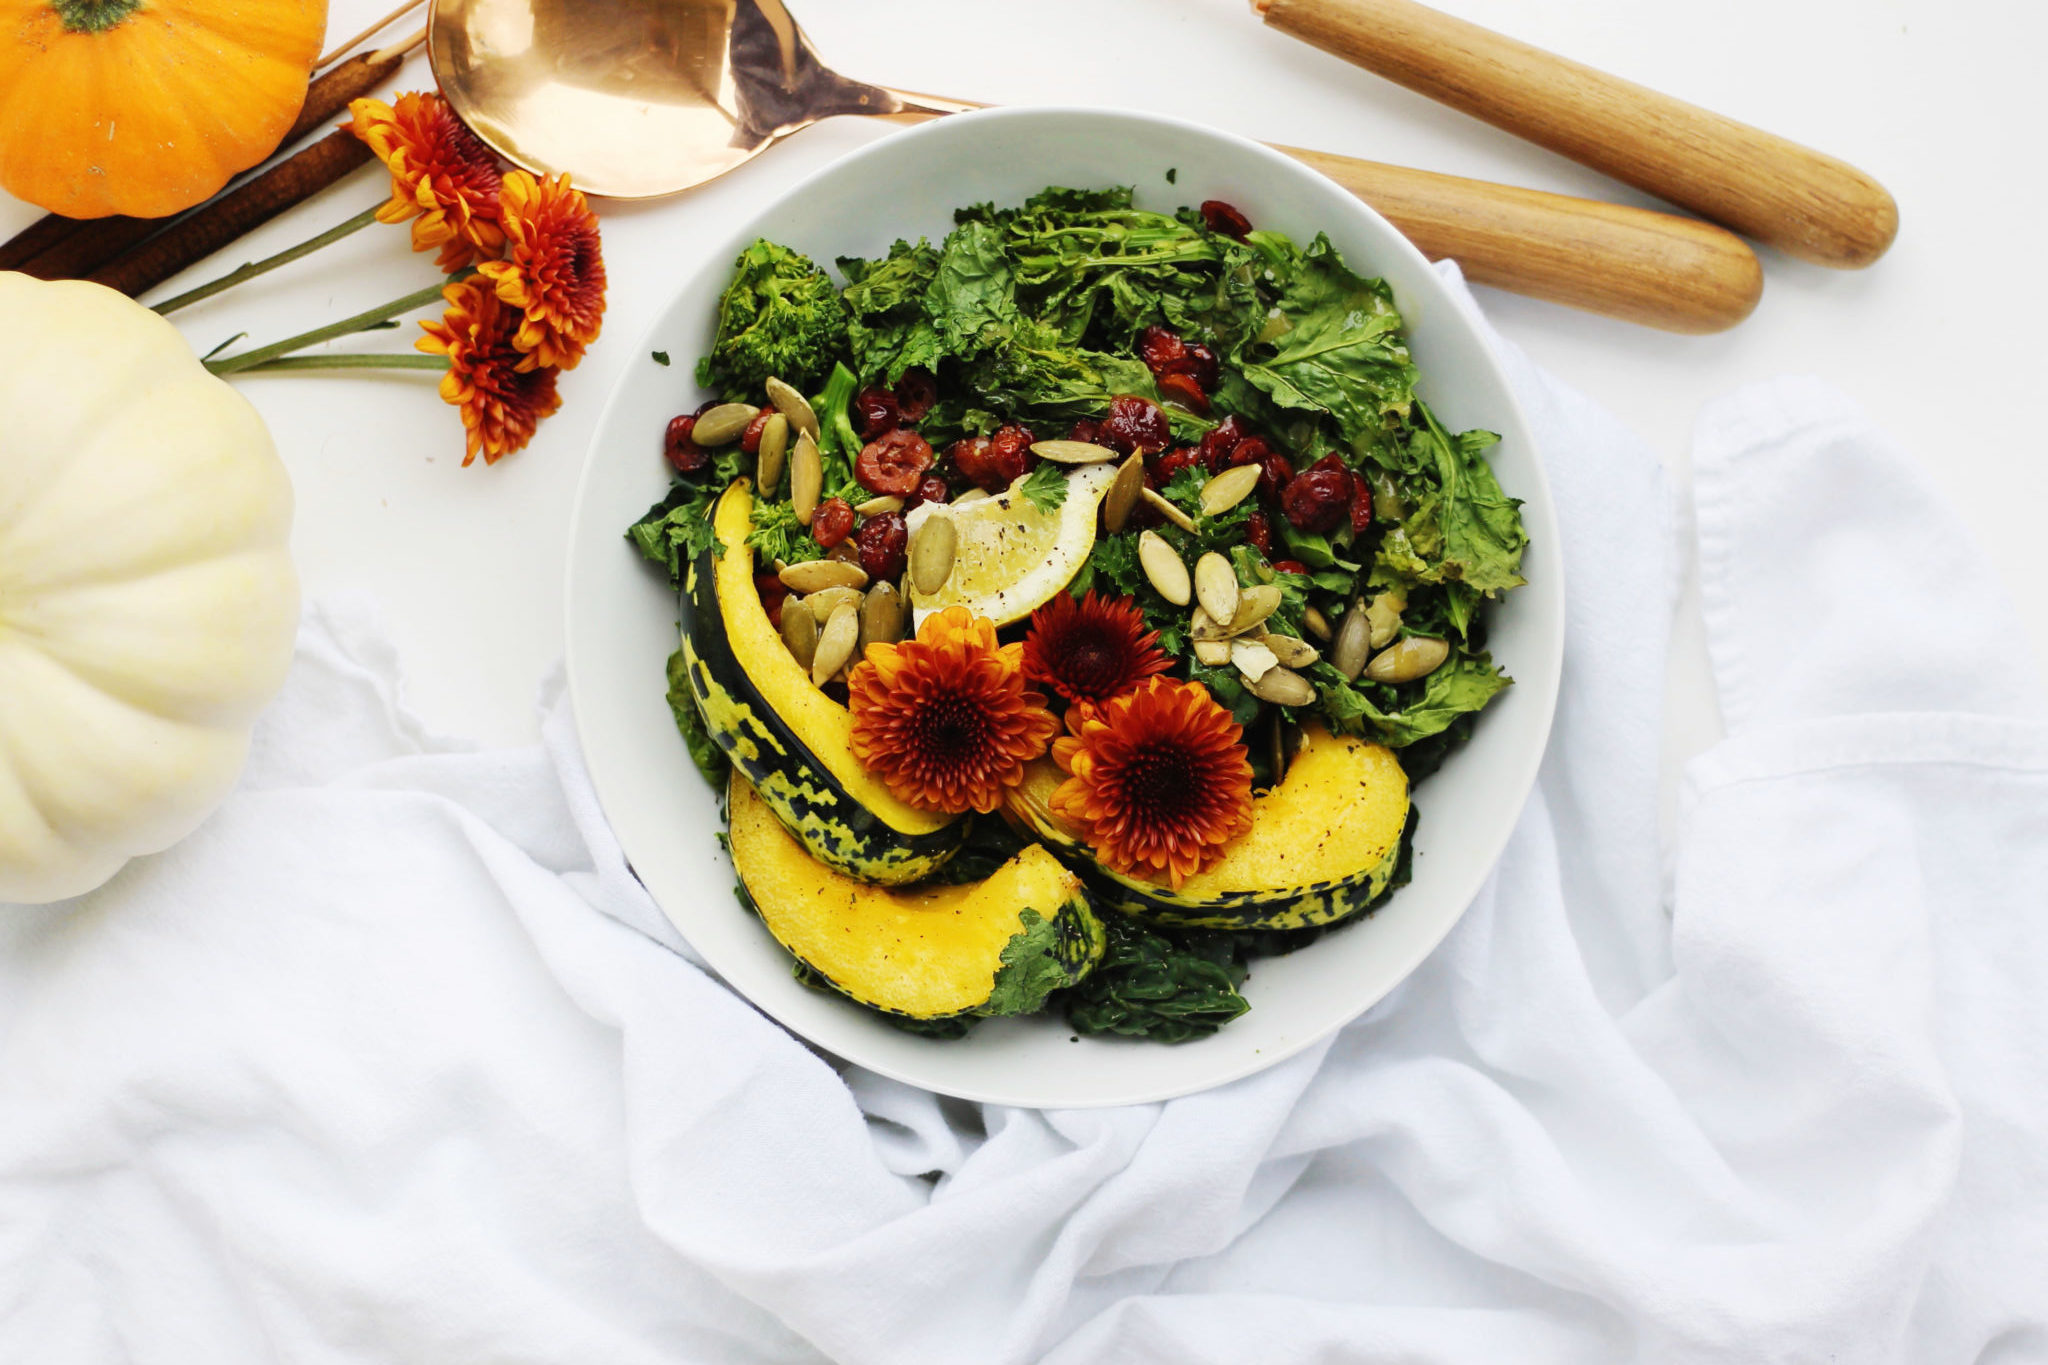 Roasted Squash Salad with Broccoli Rabe and Kale